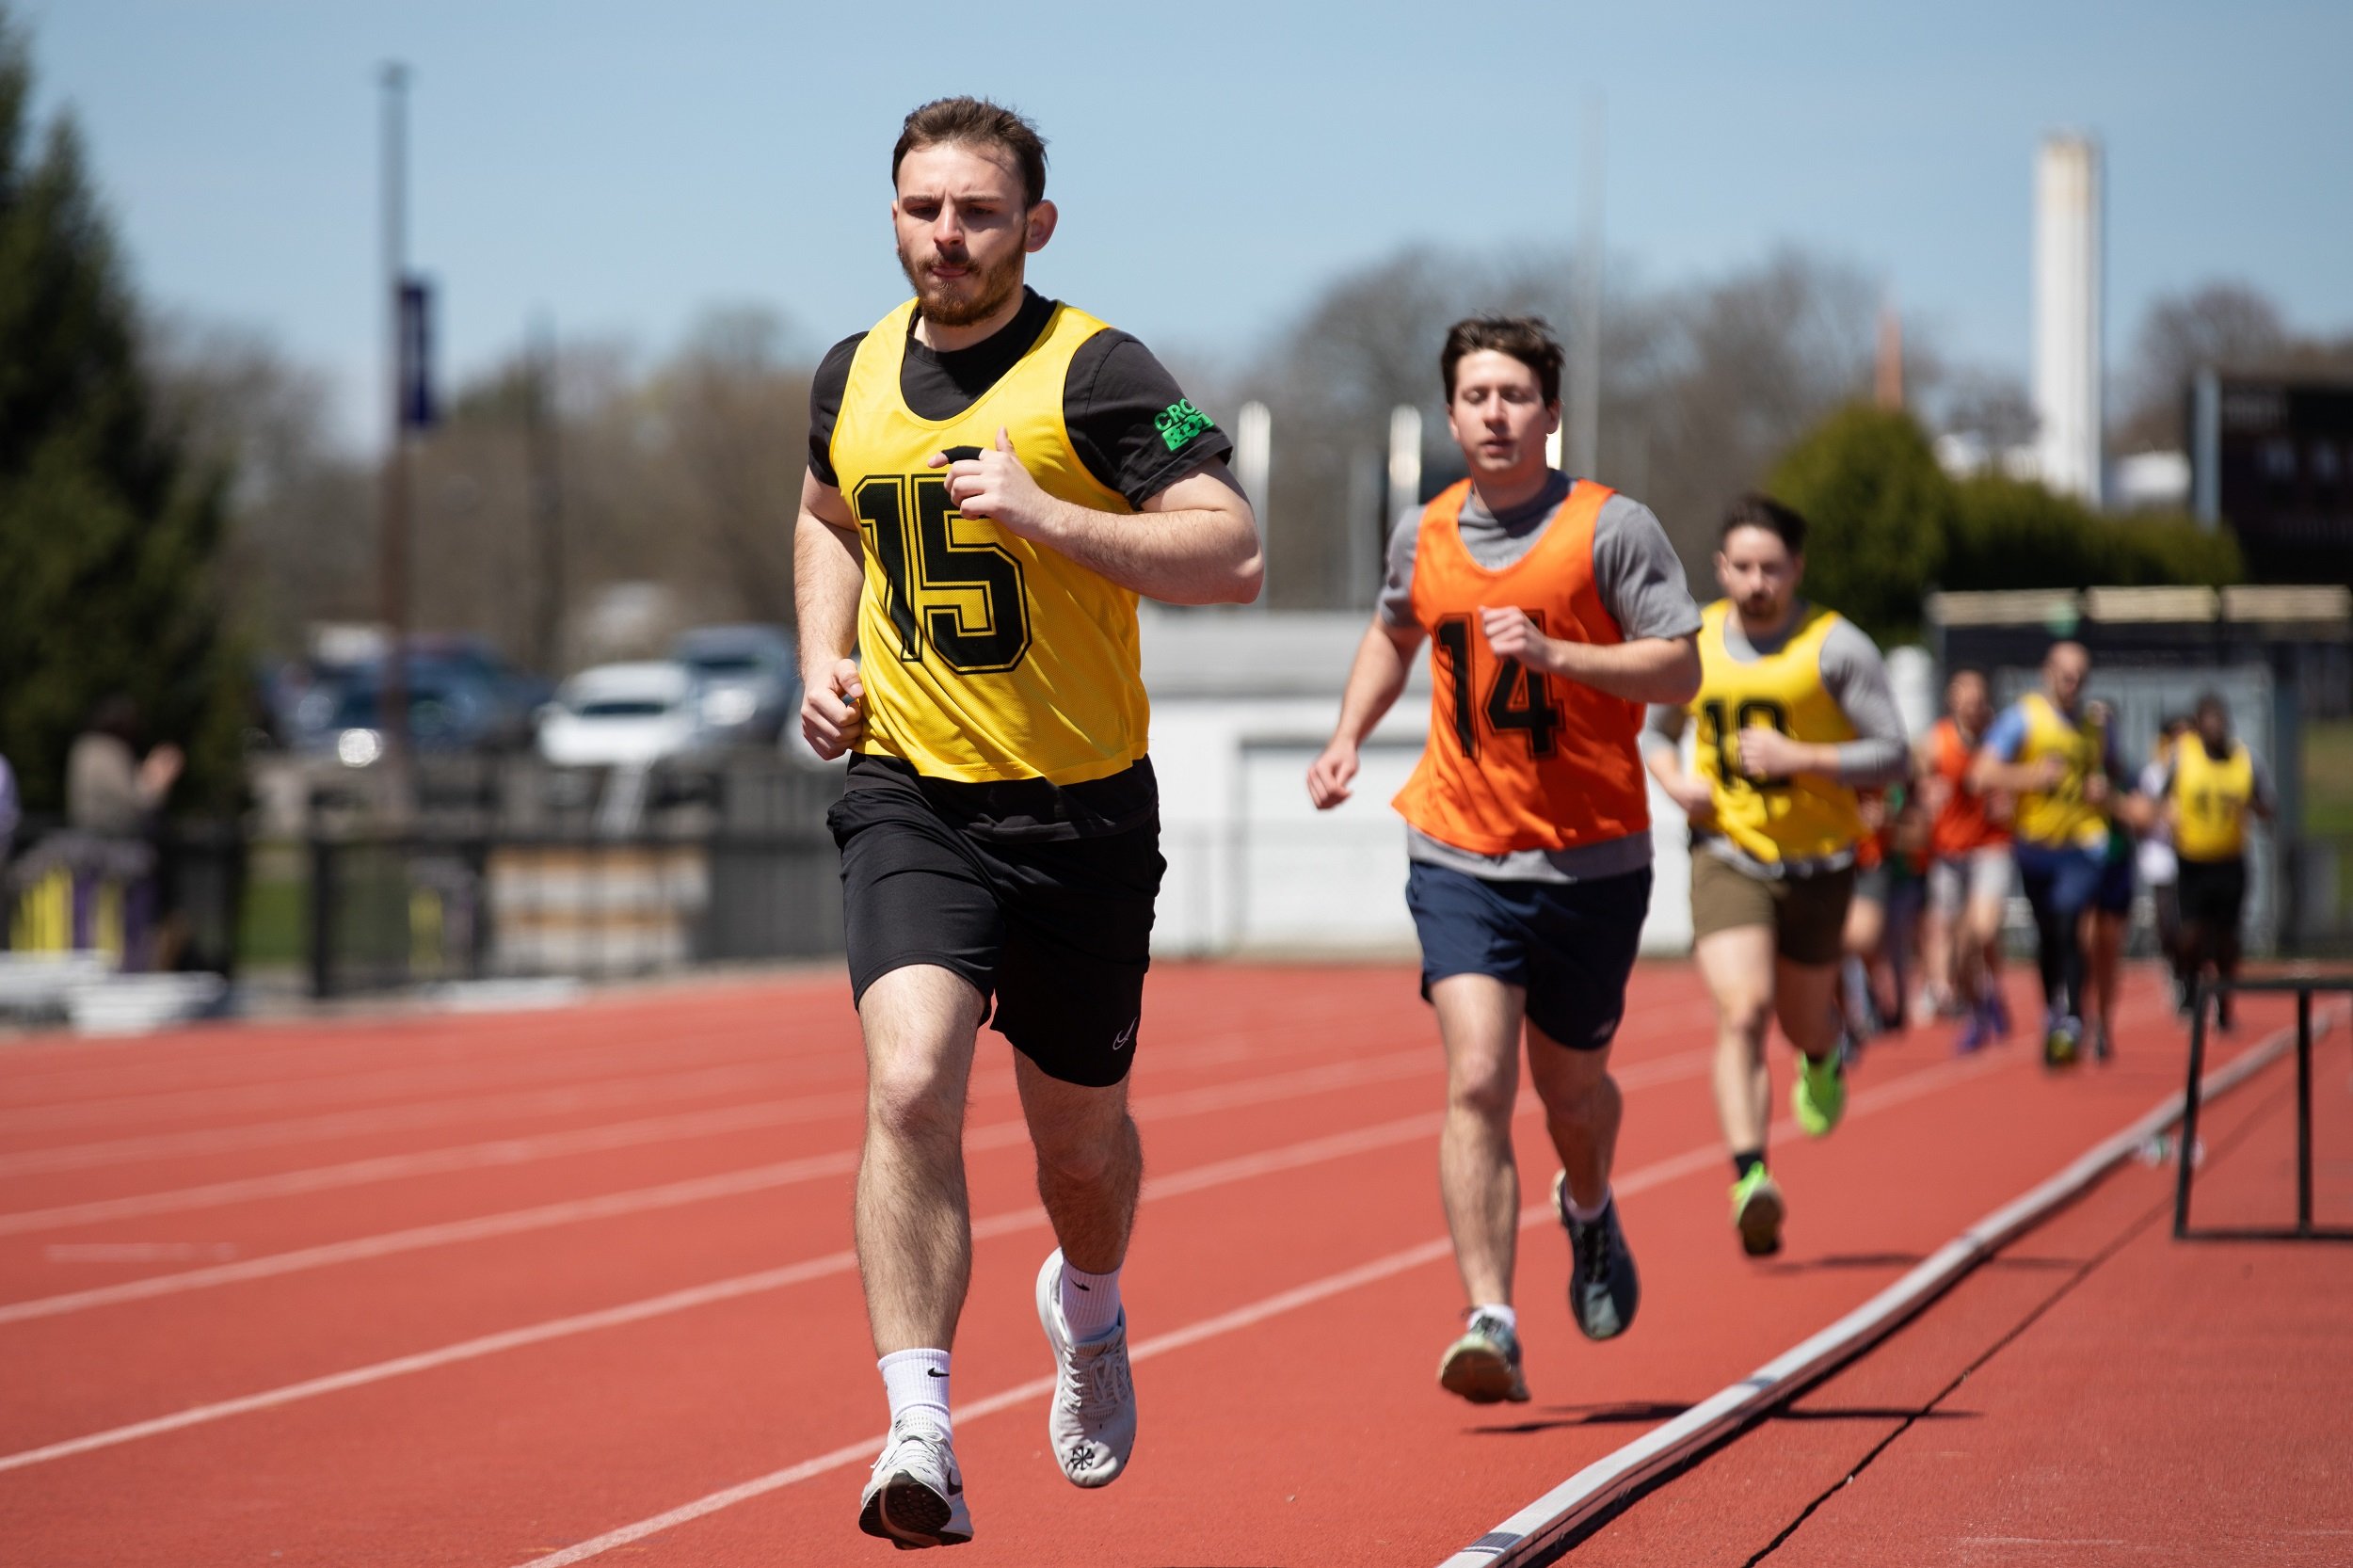 Students run on the UAlbany track during the FBI physical fitness test.